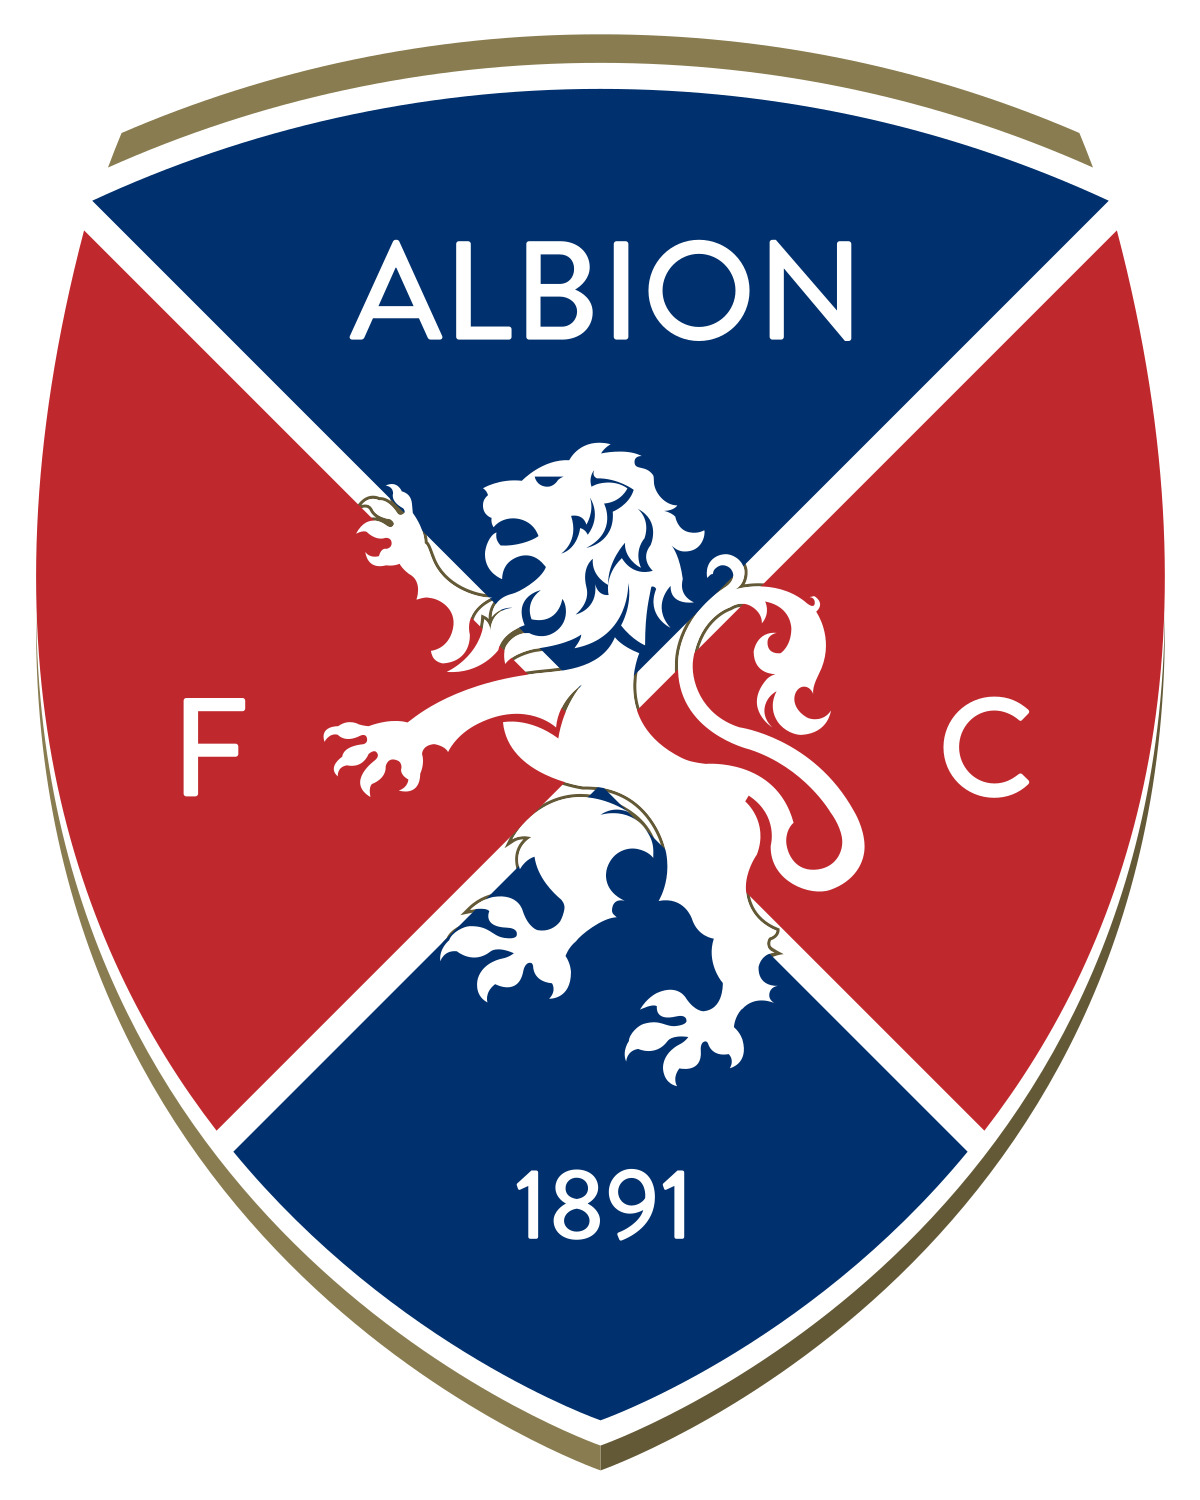 Albion FC: 20 Football Club Facts - Facts.net